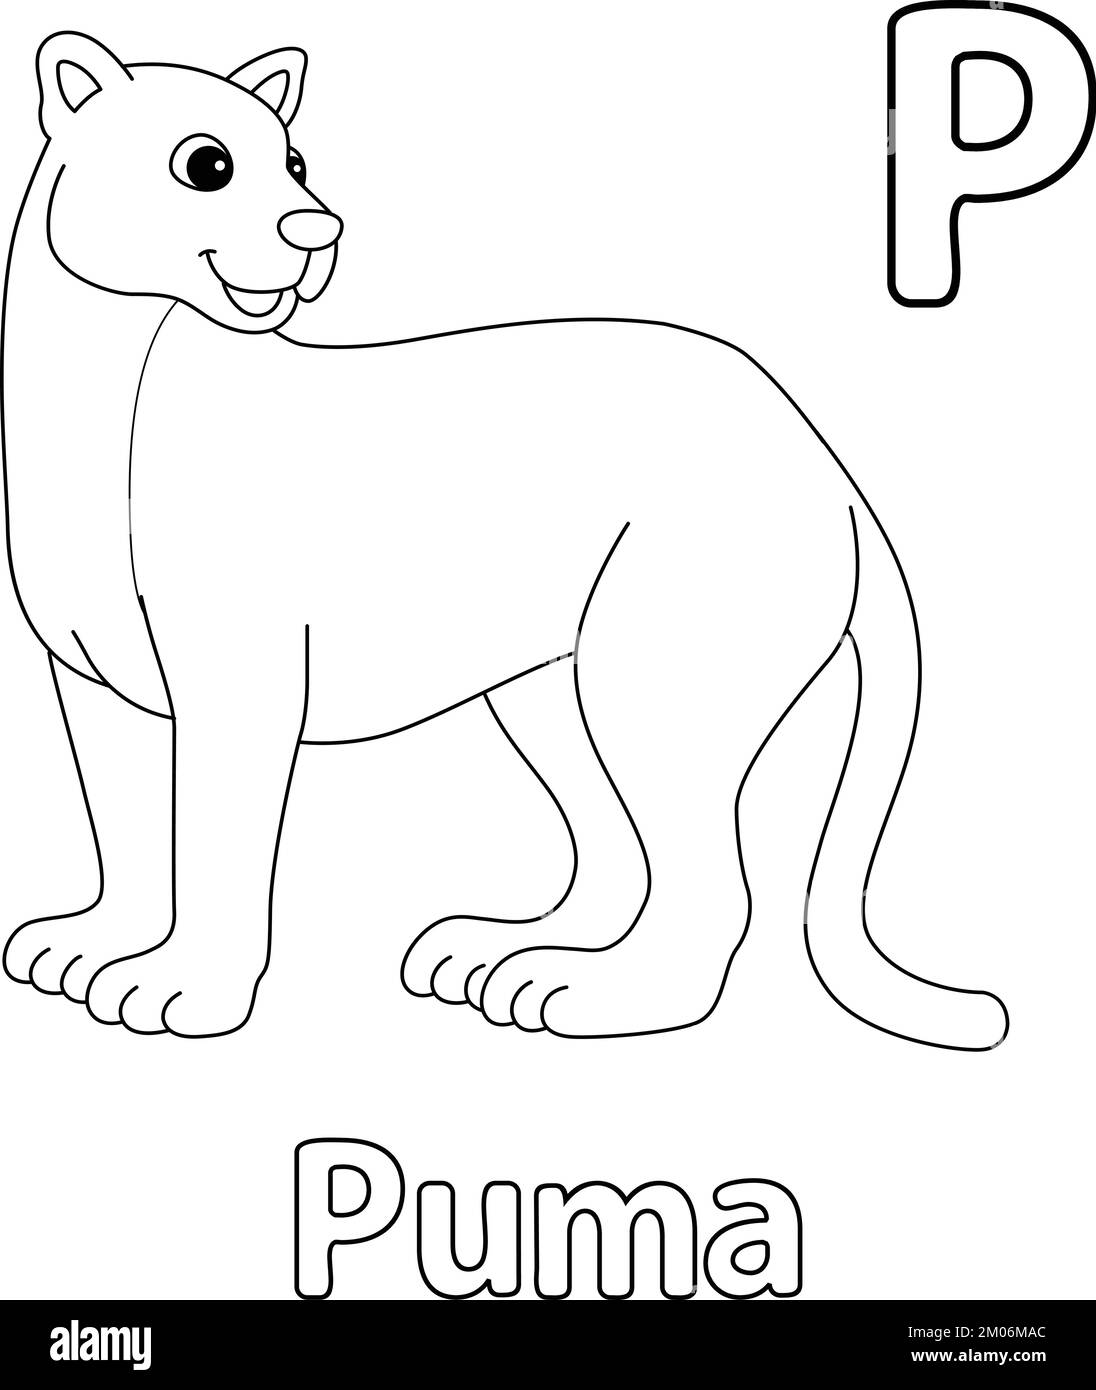 Puma Animal Alphabet ABC Isolated Coloring Page P Stock Vector